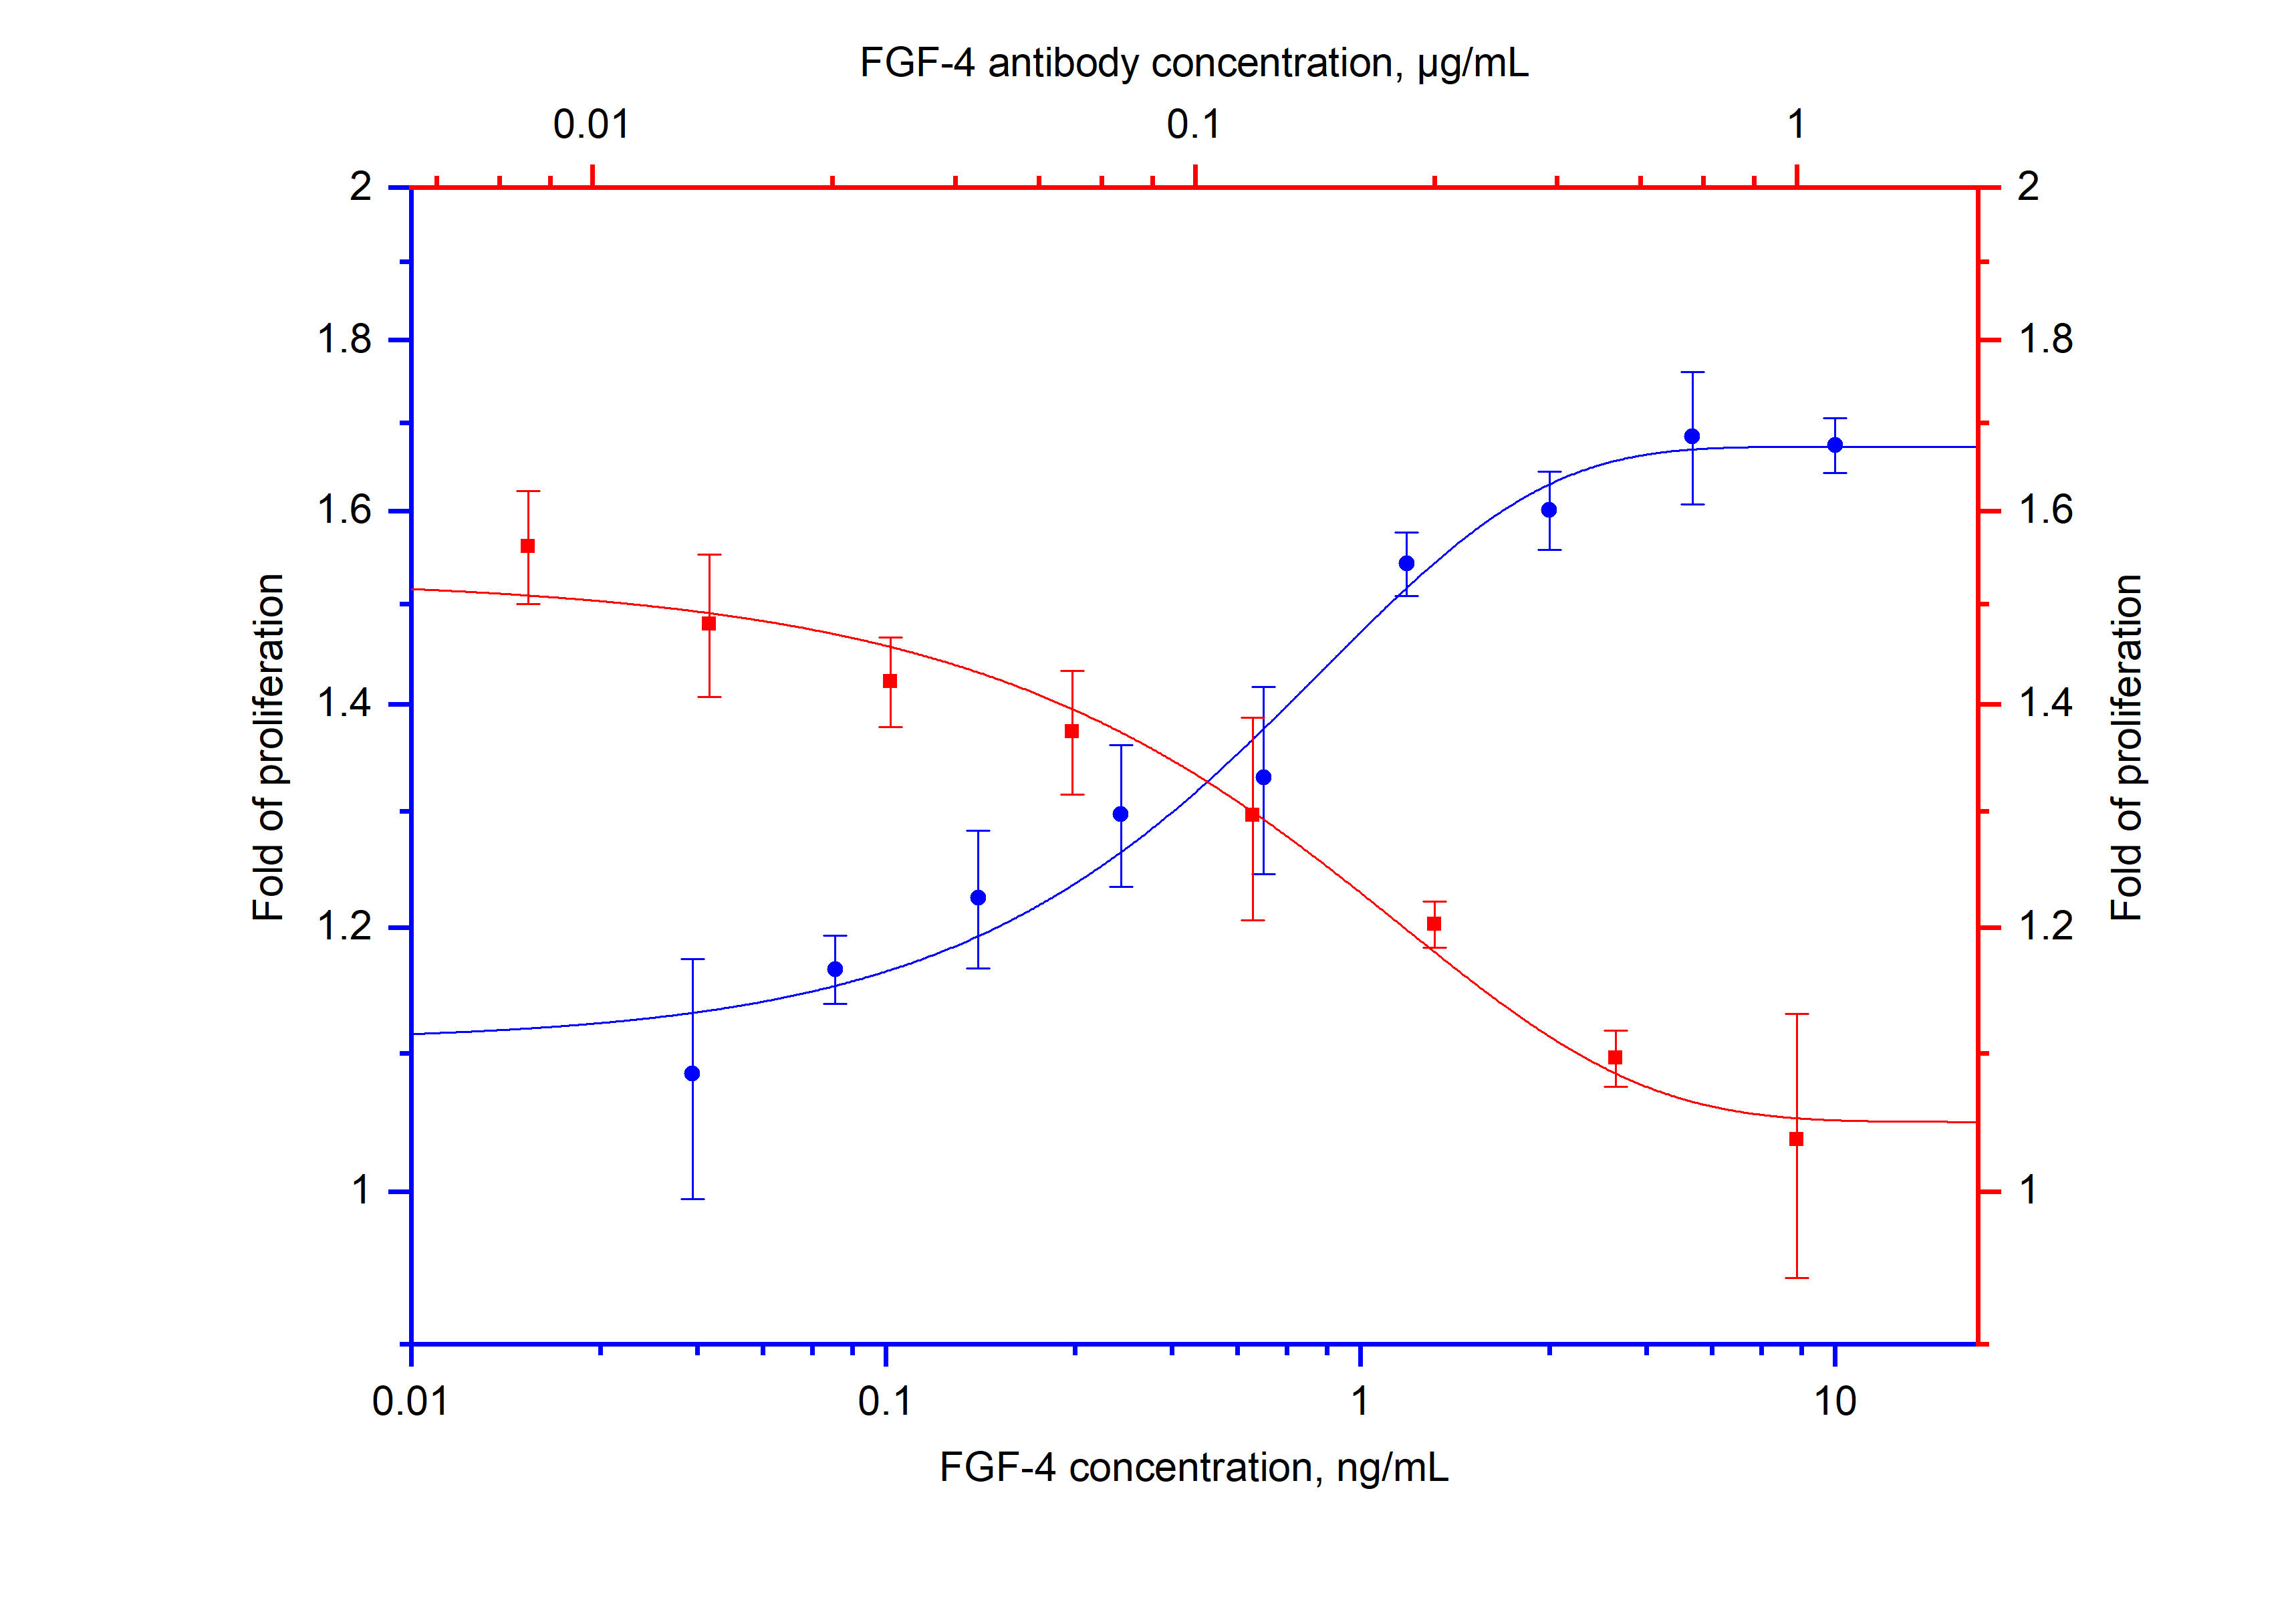 Recombinant human FGF-4 (Cat.NO. HZ-1218) stimulates the proliferation of BALB/3T3 cells (mouse fibroblast cell) under low FBS condition in a dose-dependent manner (blue curve, refer to bottom X-left Y axis). The activity of human FGF-4 (2ng/mL) is neutralized by mouse anti-human FGF-4 monoclonal antibody 69022-1-Ig at serial dose (red curve, refer to top X-right Y axis). The ND50 is typically 0.1-0.4 μg/mL.